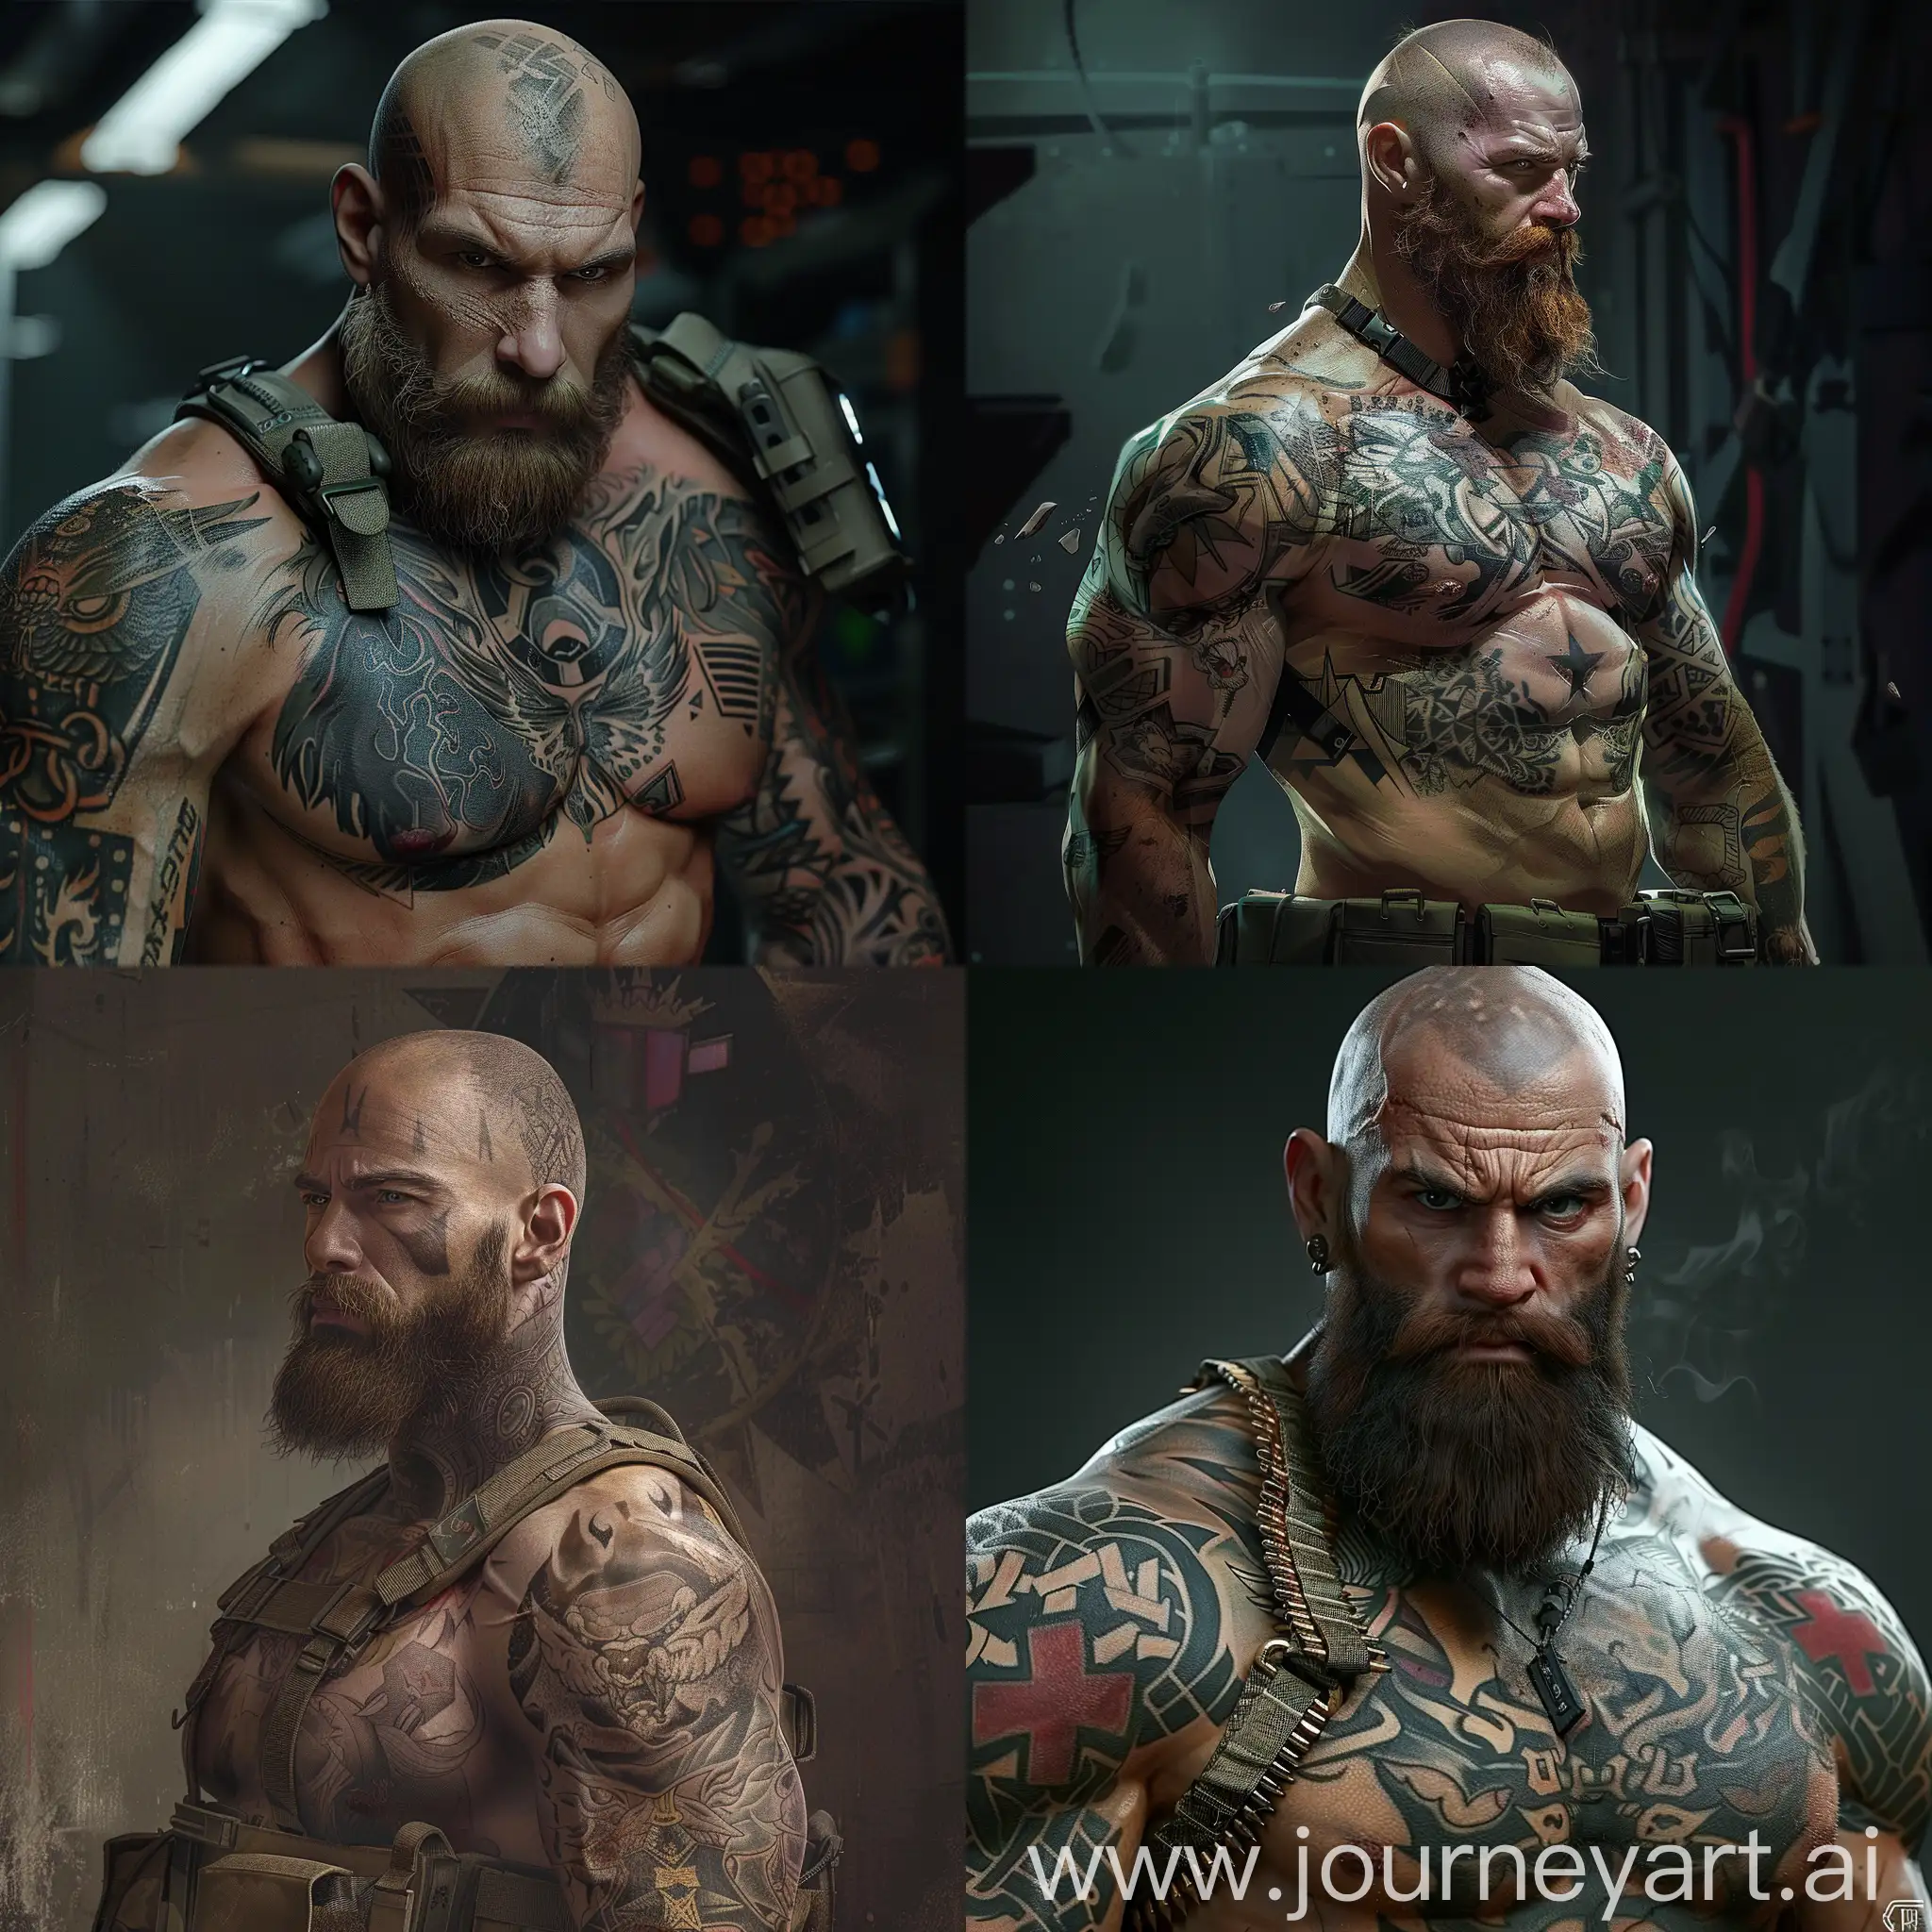 A muscular man with no hair on his head, with a full beard and numerous tattoos, is next to the military in 2D.